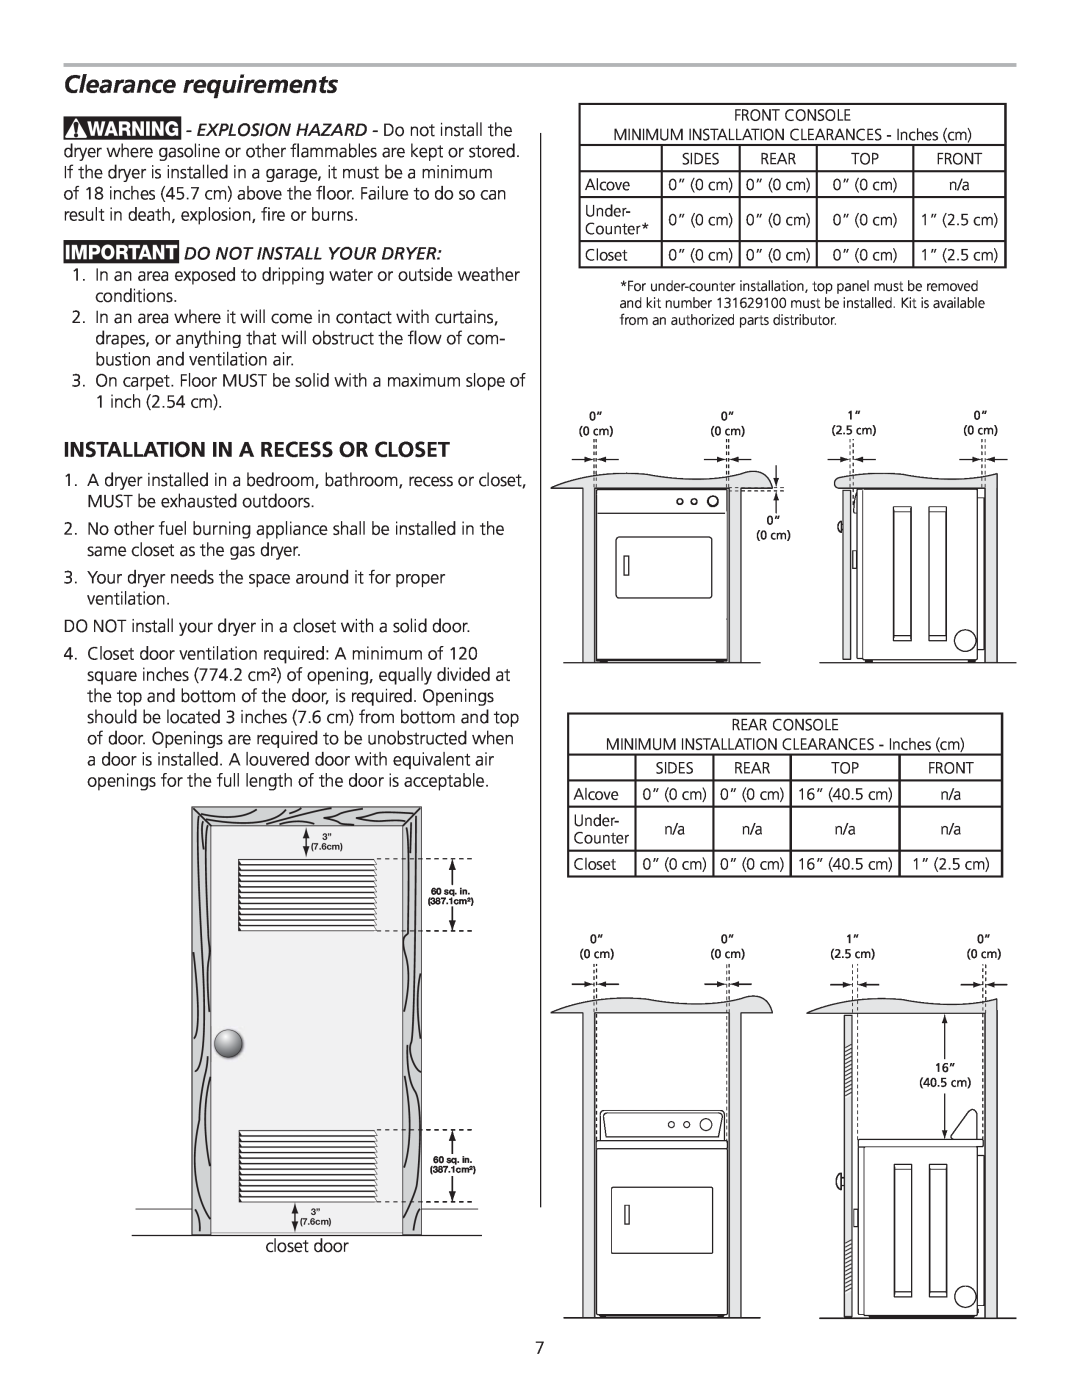 Frigidaire 137153700B Clearance requirements, Installation In A Recess Or Closet, Do Not Install Your Dryer 